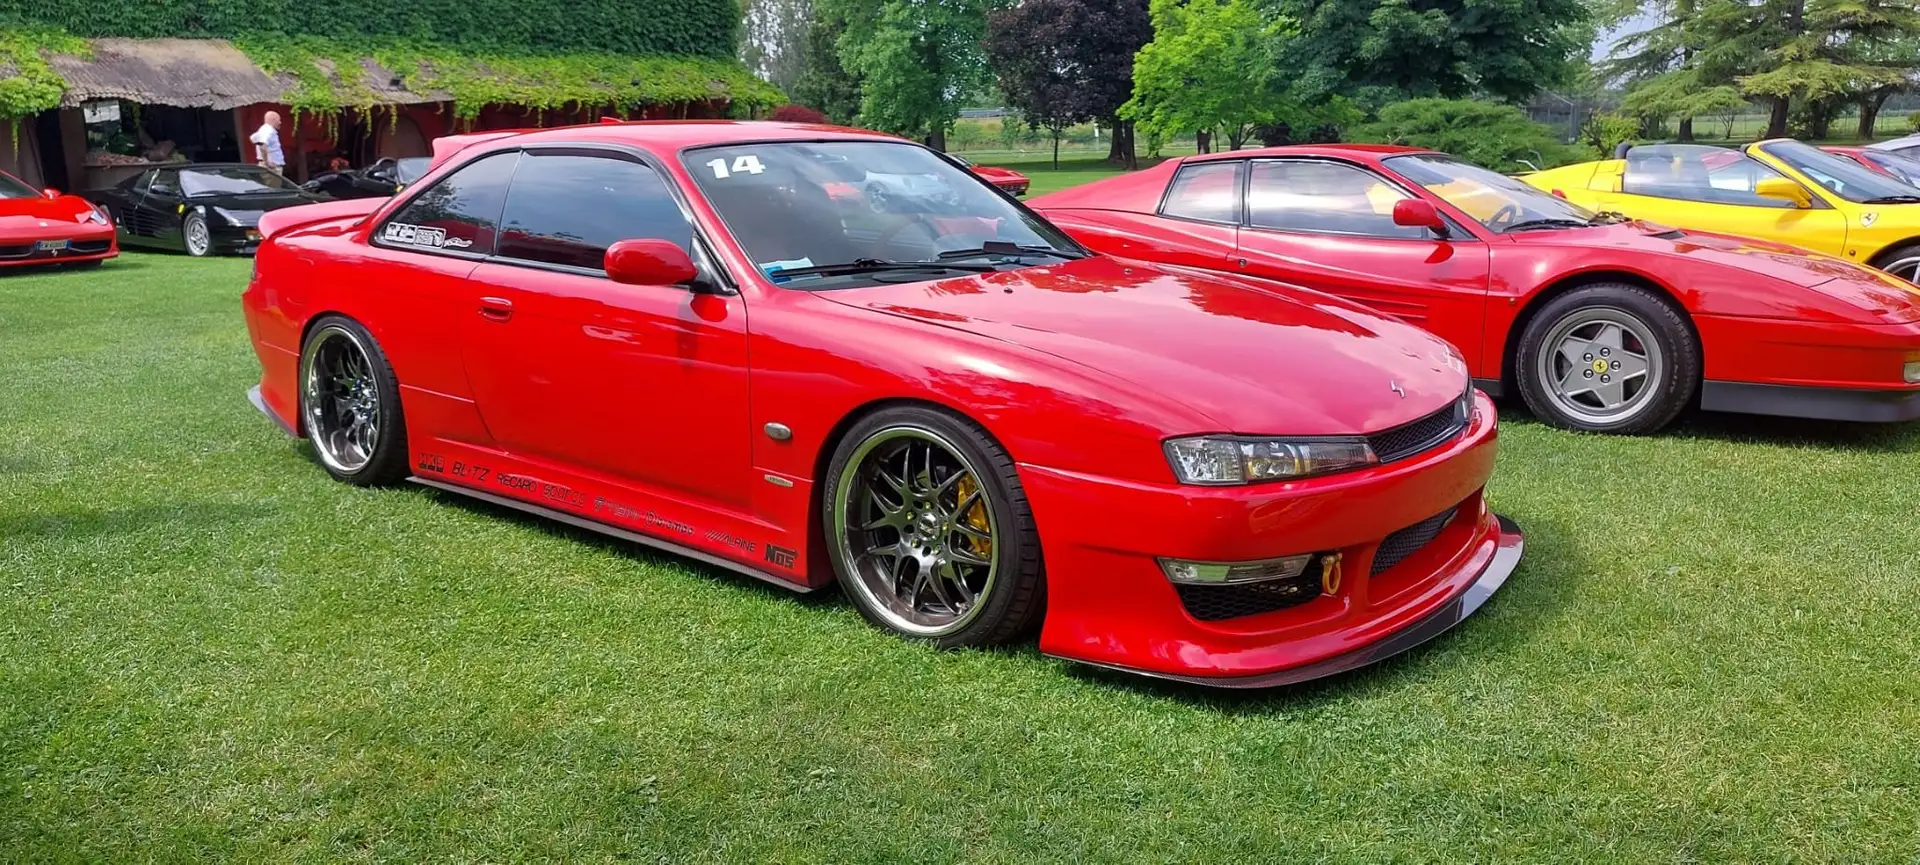 Nissan 200 SX Silvia Red - 2